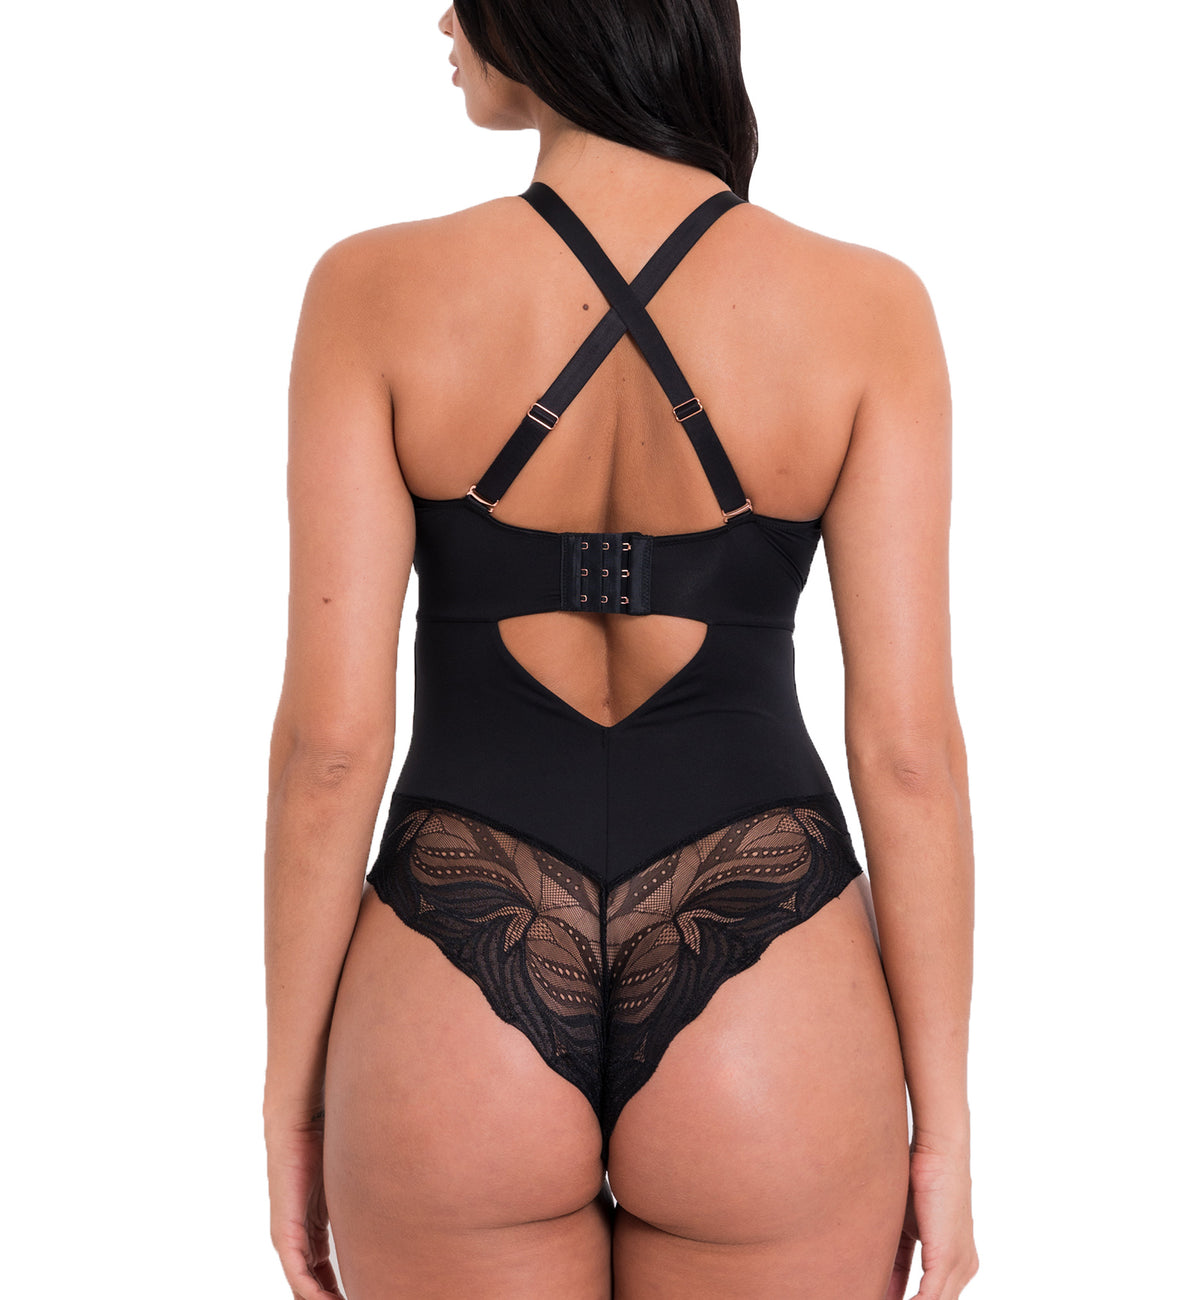 Scantilly by Curvy Kate Indulgence Stretch Lace Body Suit (ST010704),S,Blk/Latte - Black/Latte,Small